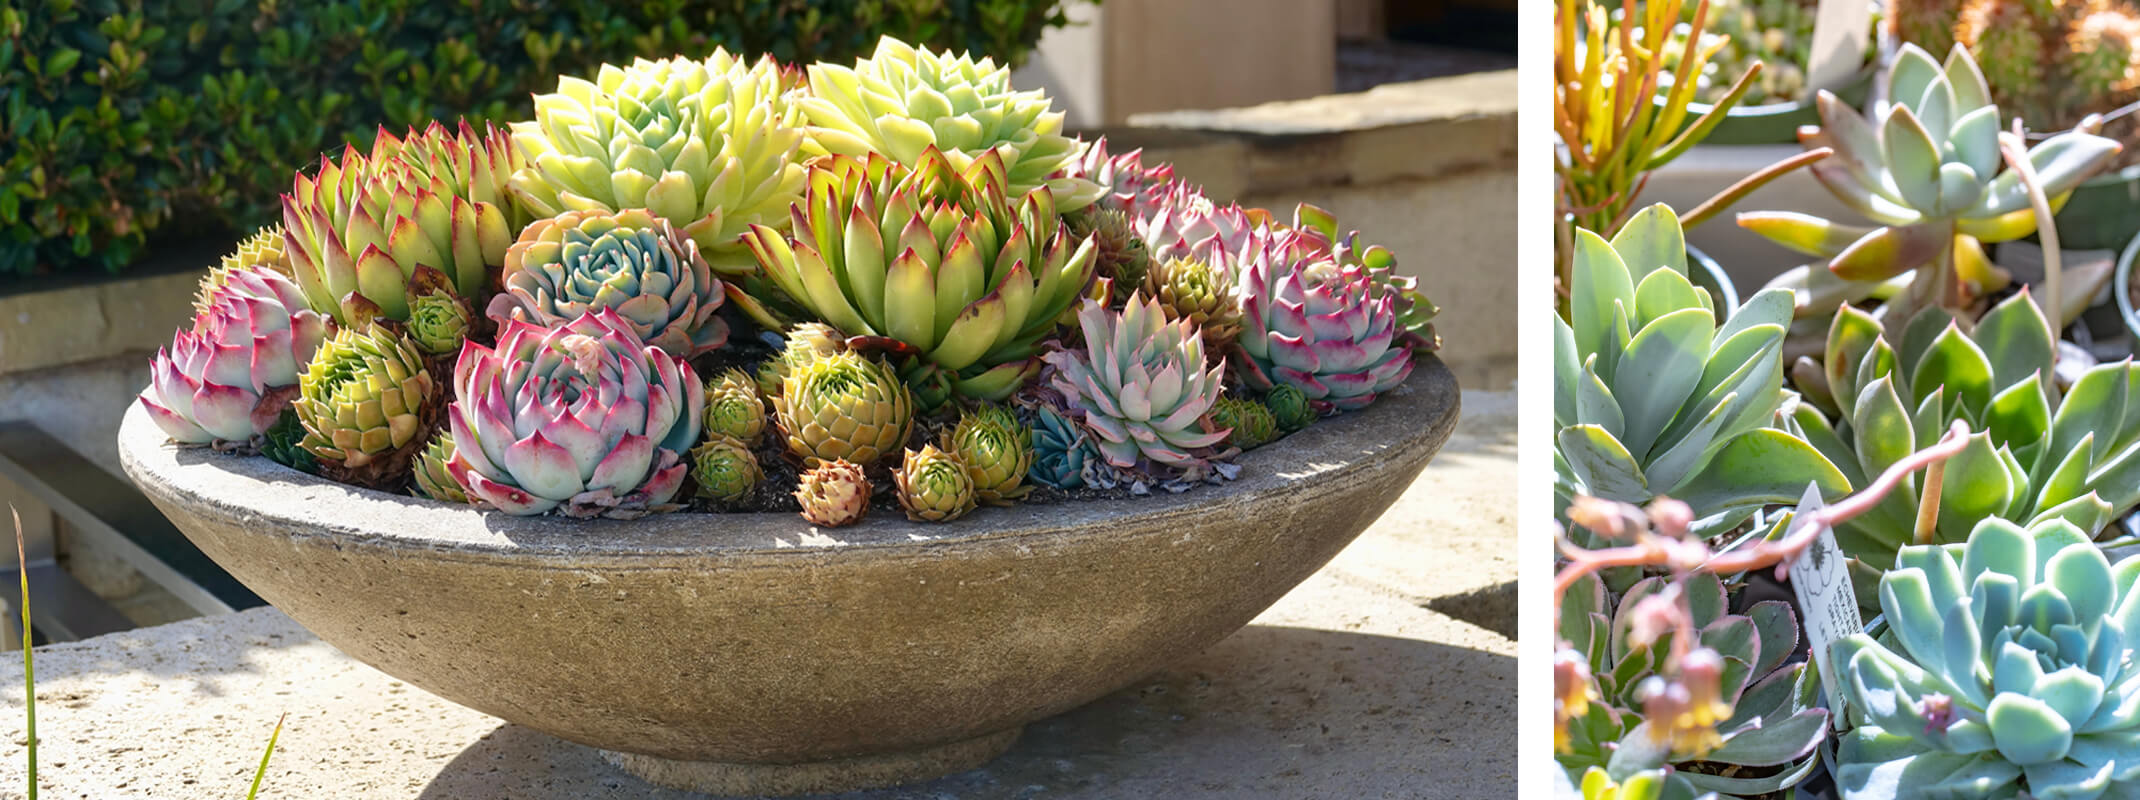 succulents hen and chicks and assortment fall container plants